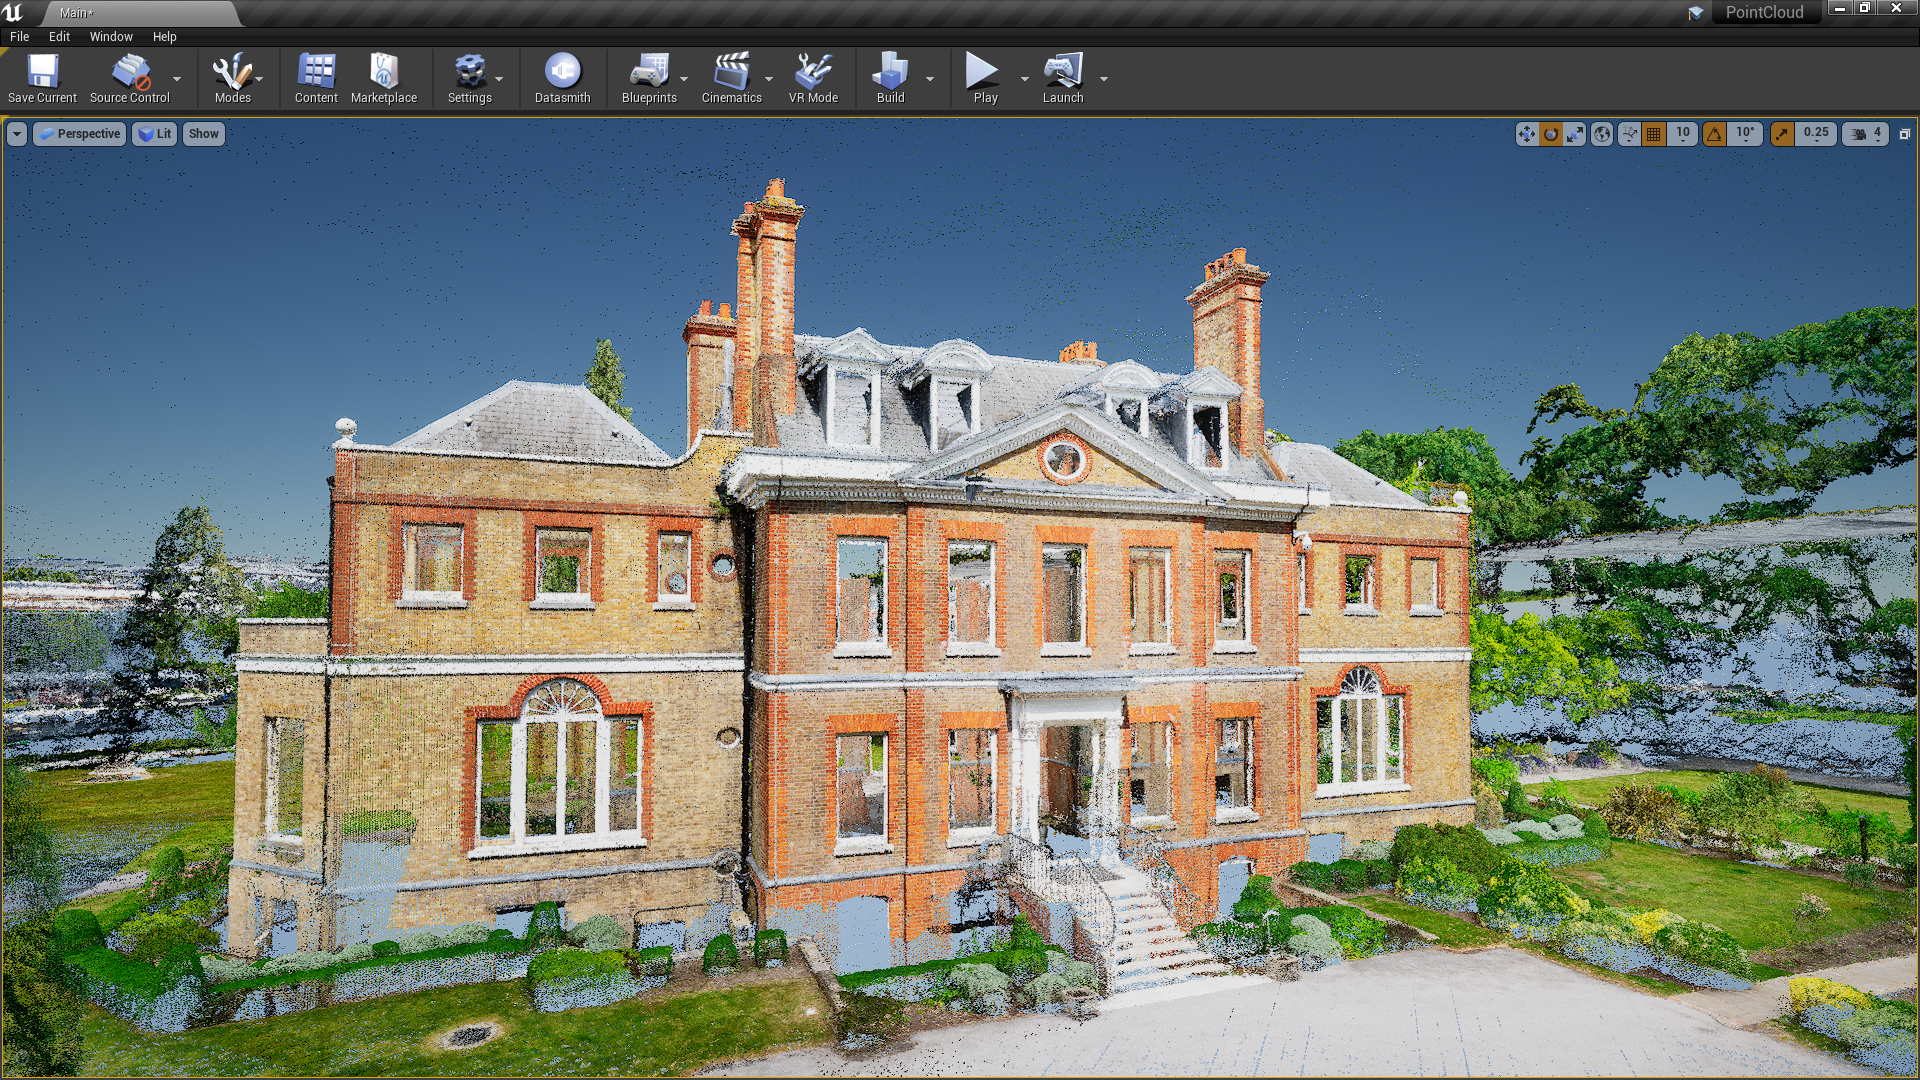 Unreal Engine 4 25 Includes Built In Support For Laser Scanned Point Clouds